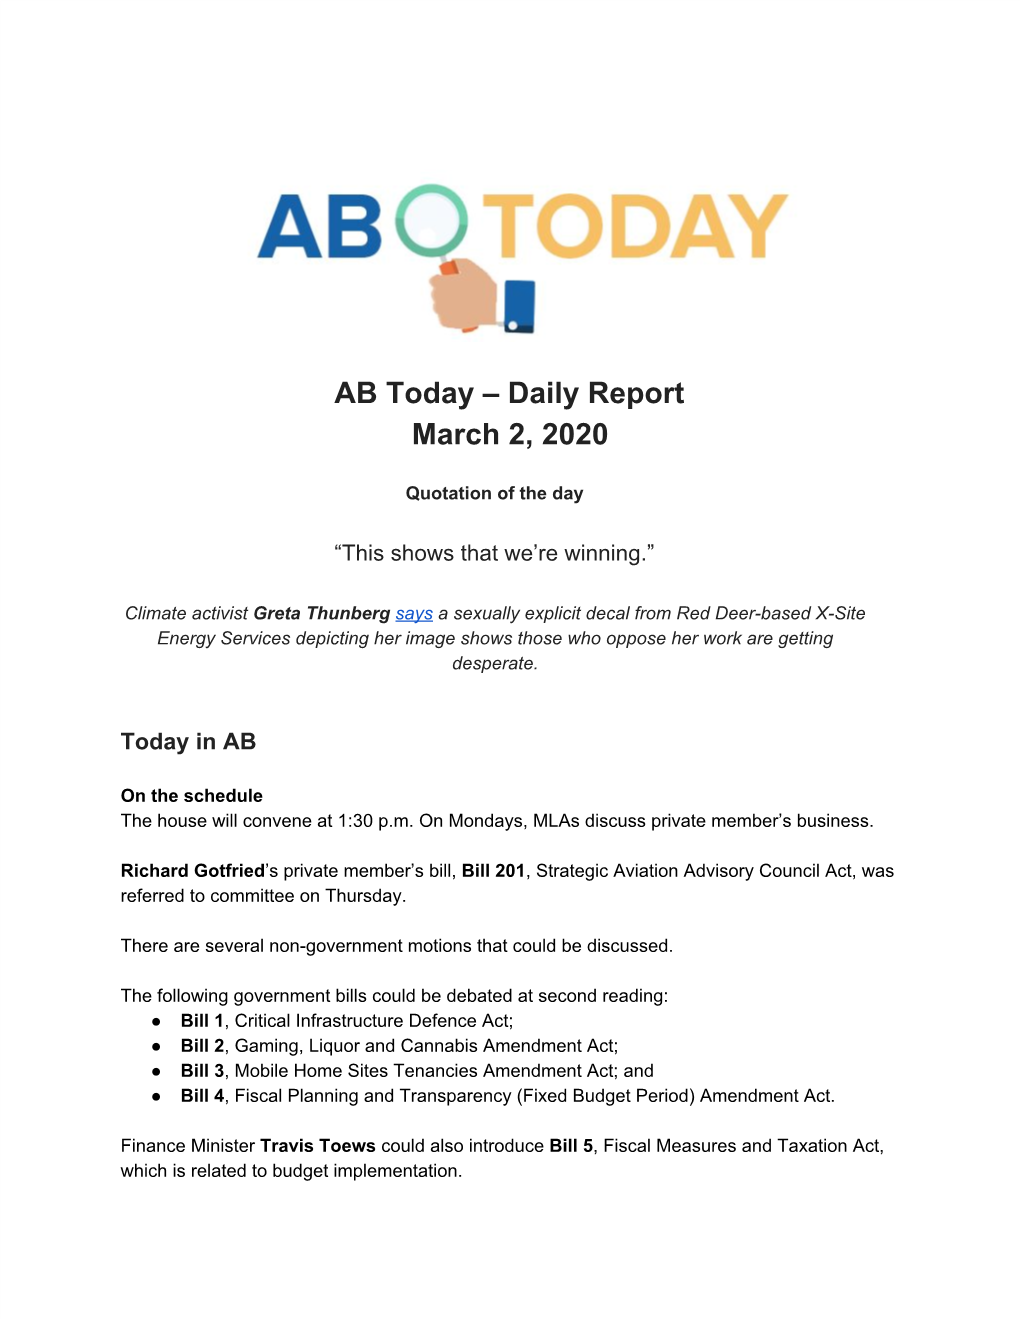 AB Today – Daily Report March 2, 2020